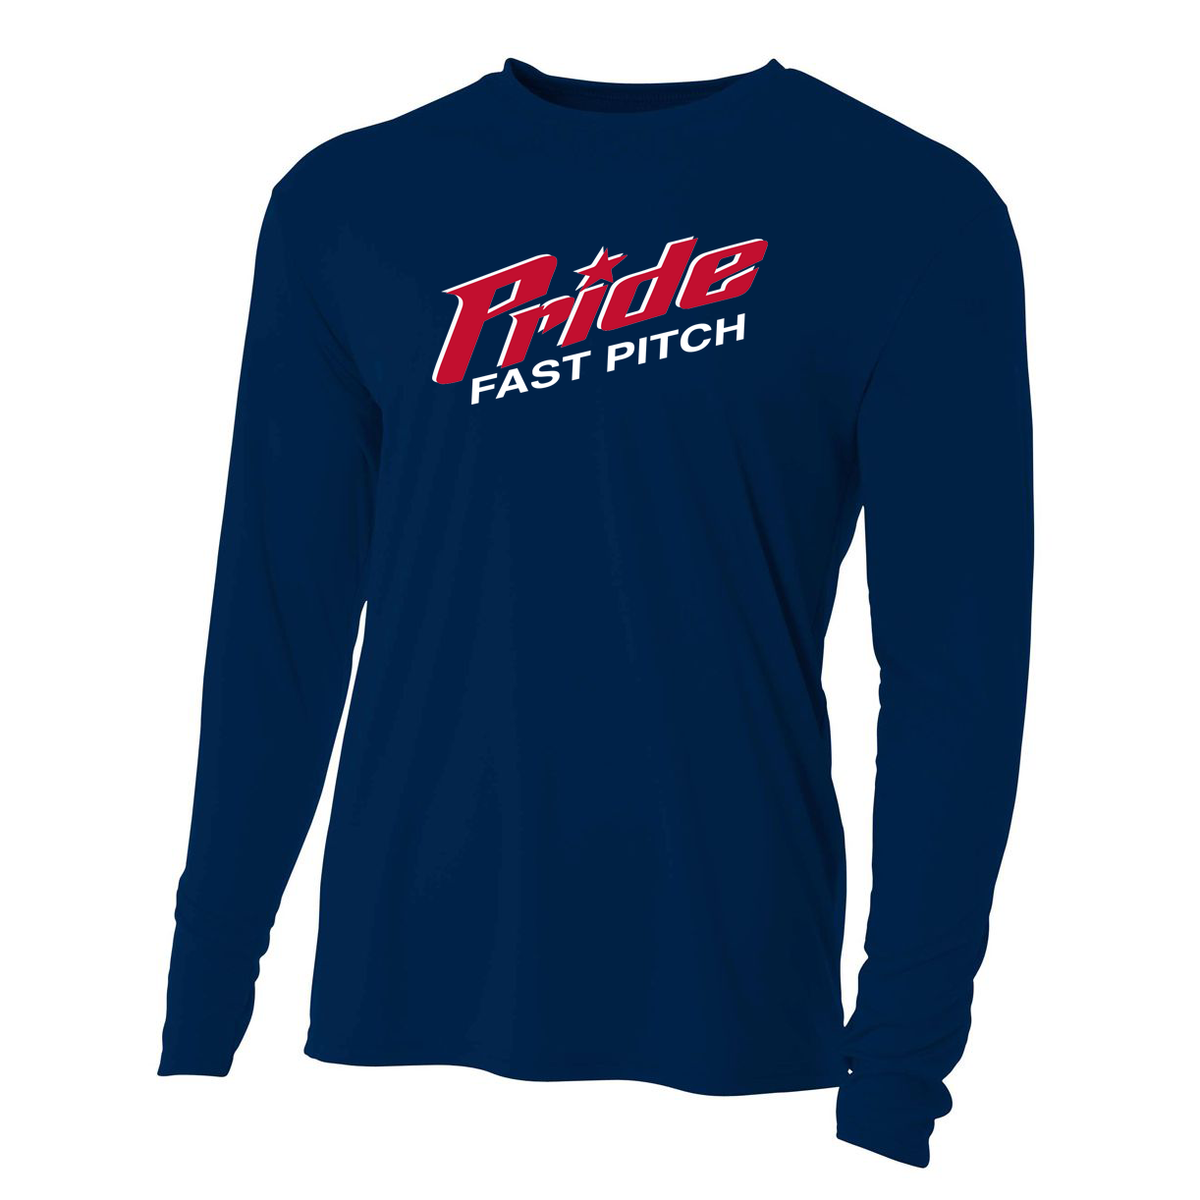 Long Island Pride Fastpitch Cooling Performance Long Sleeve Crew